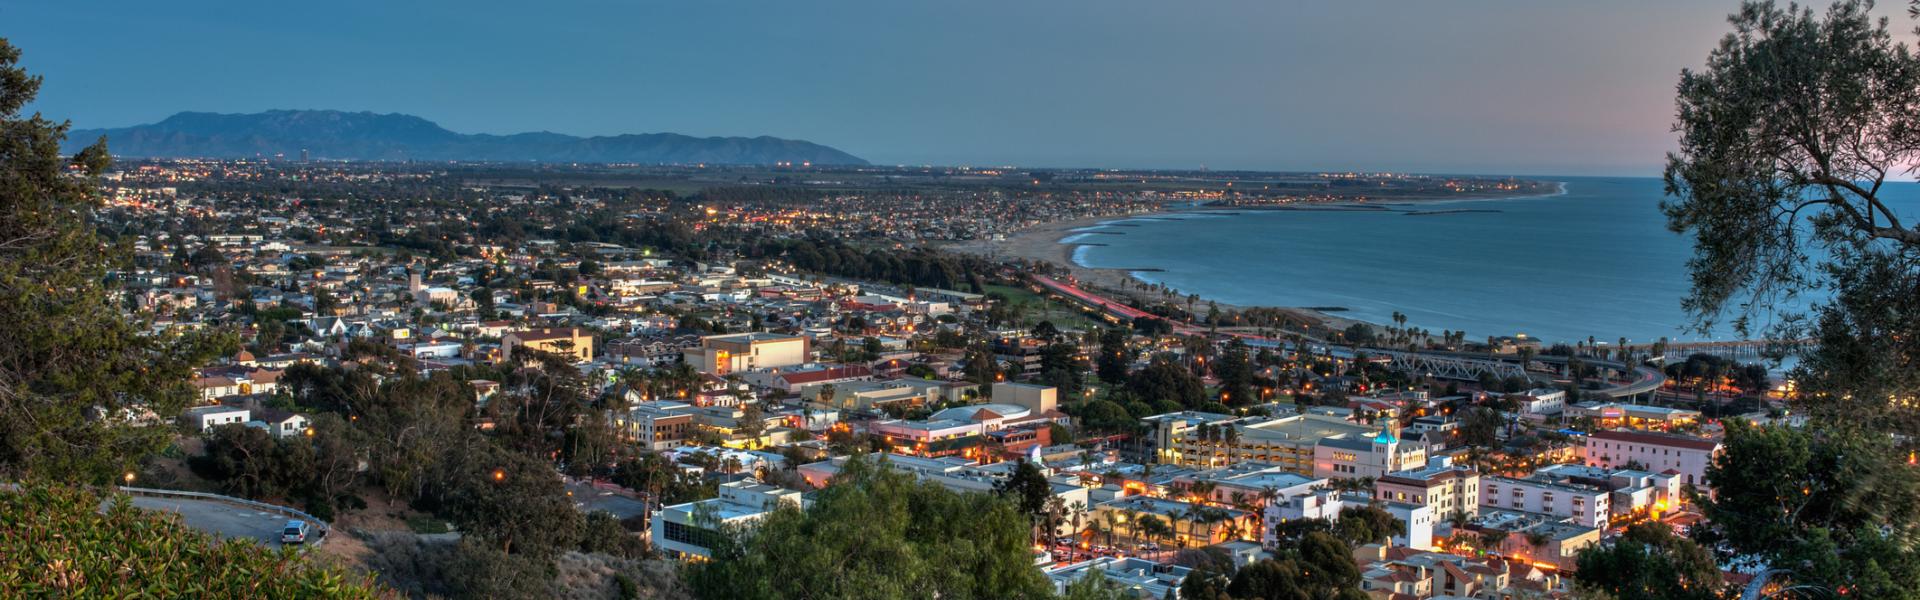 Holiday lettings & accommodation in Ventura - HomeToGo